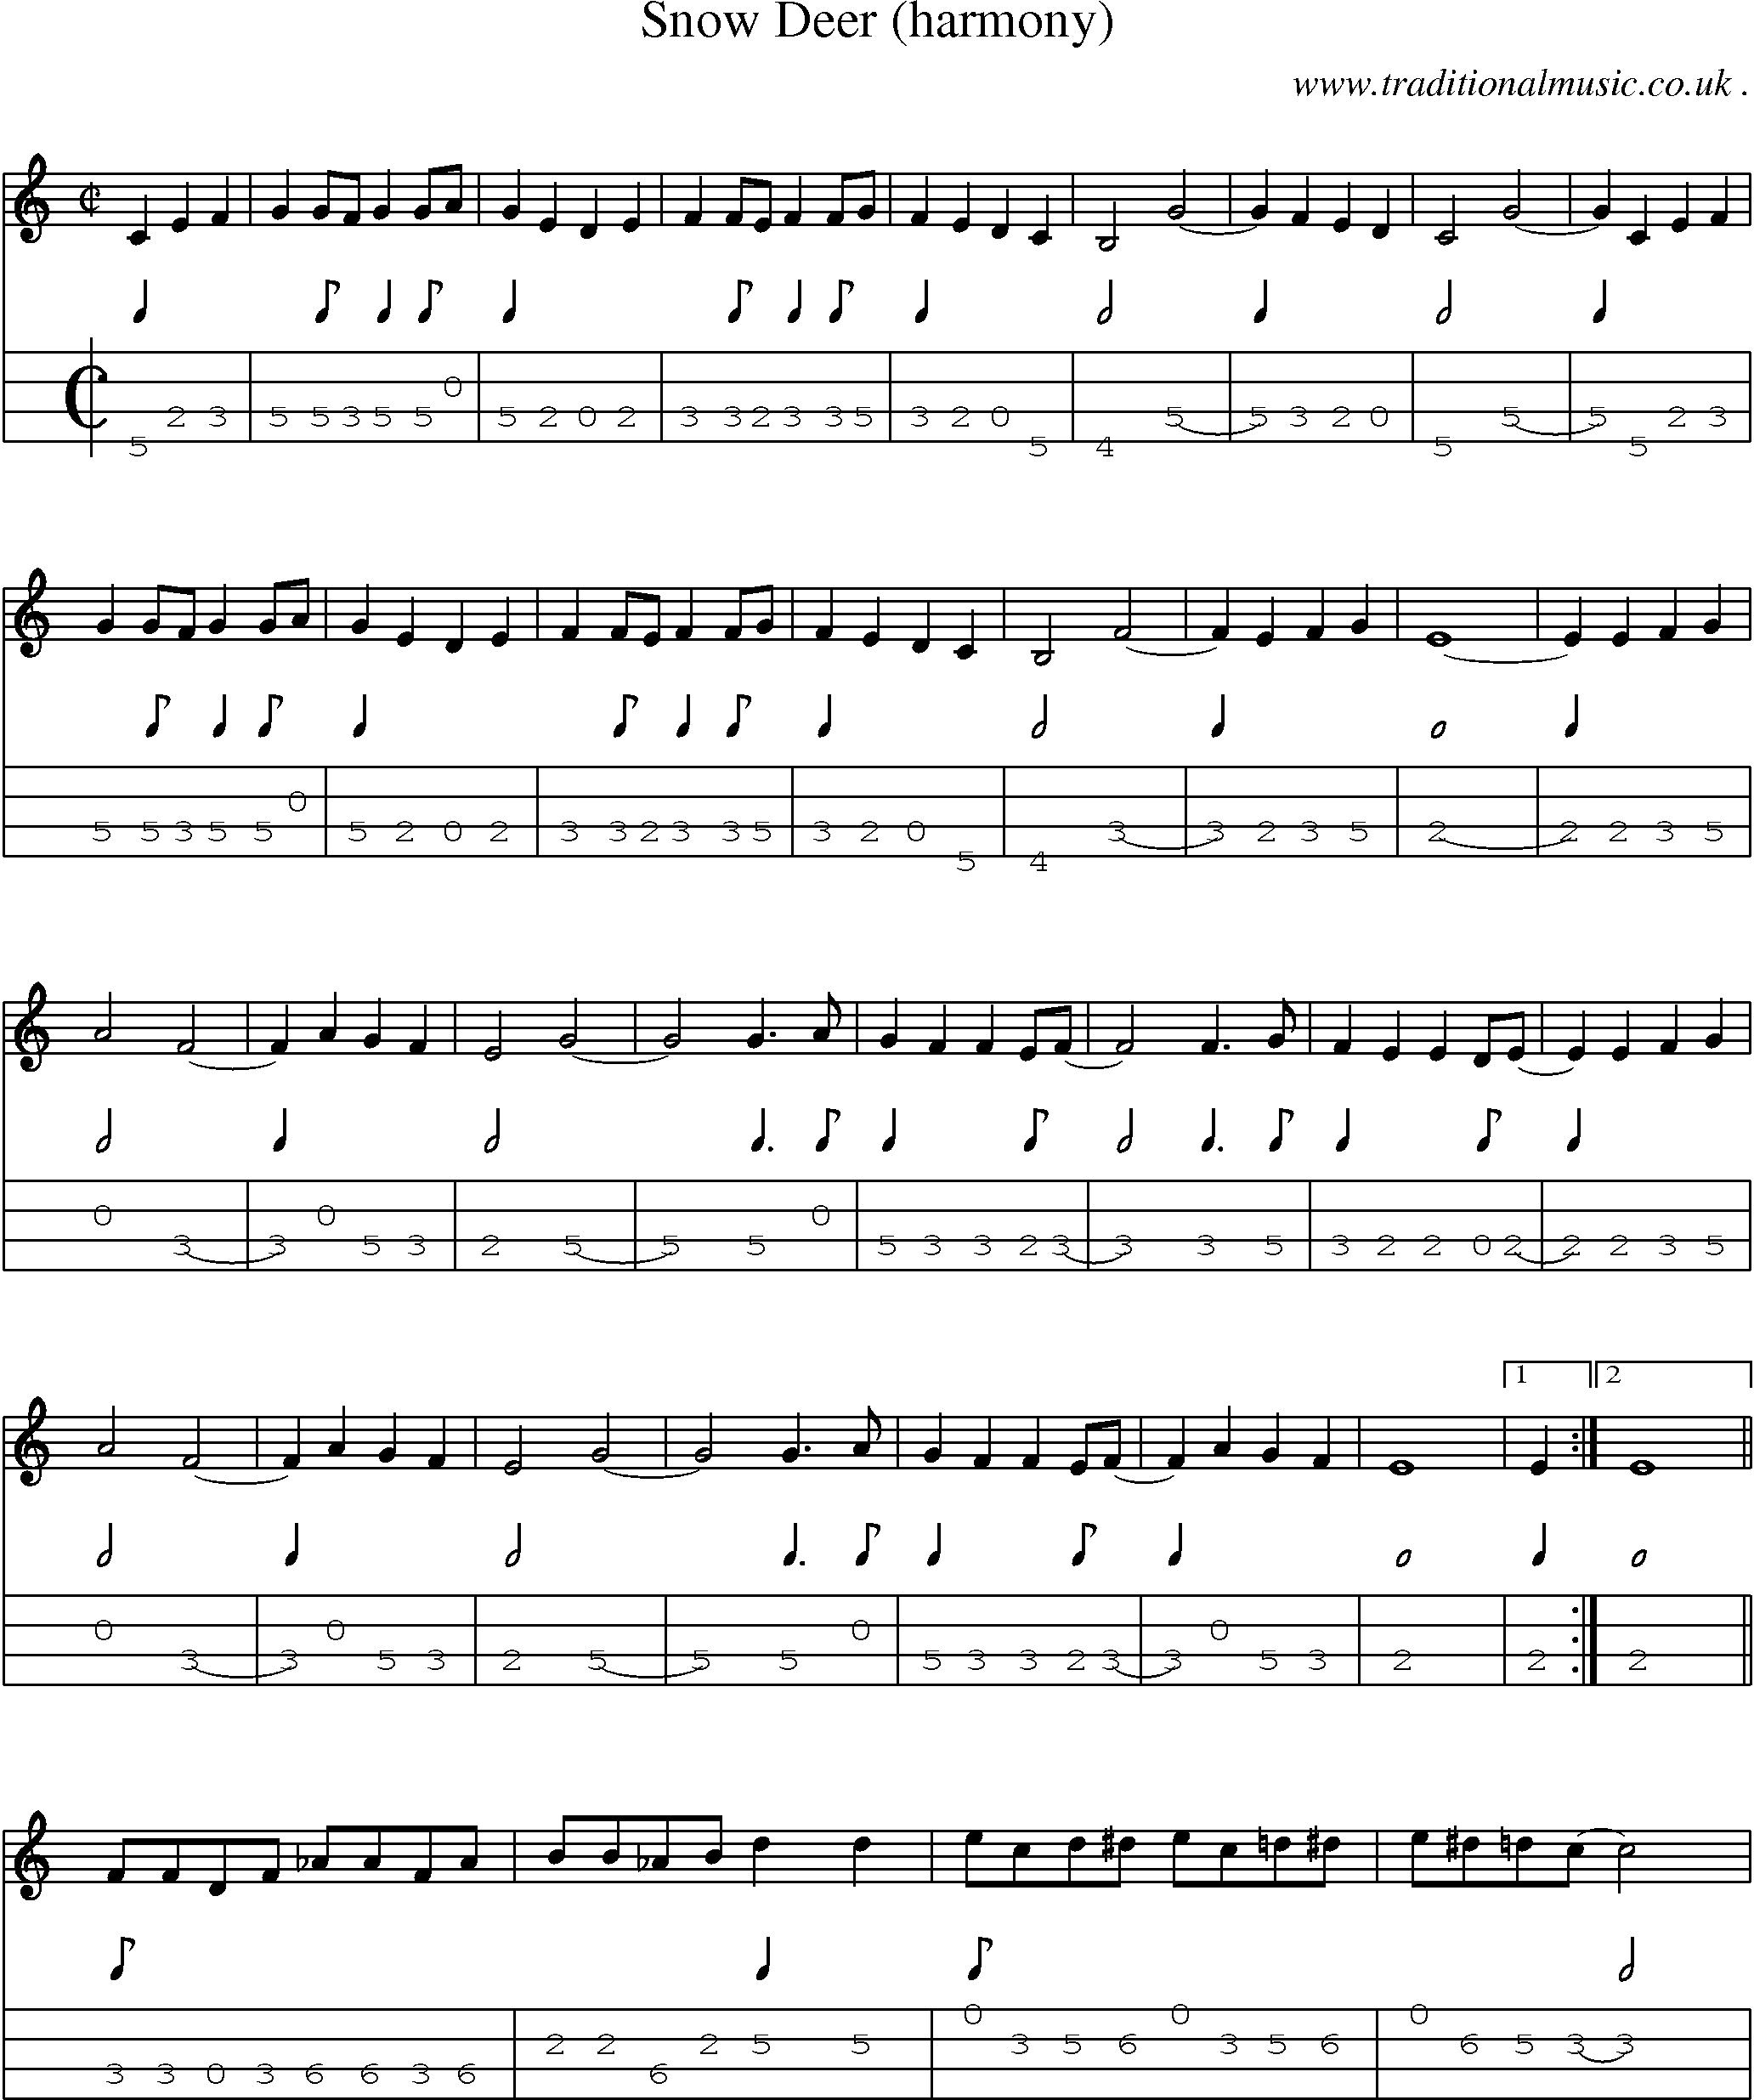 Music Score and Mandolin Tabs for Snow Deer (harmony)